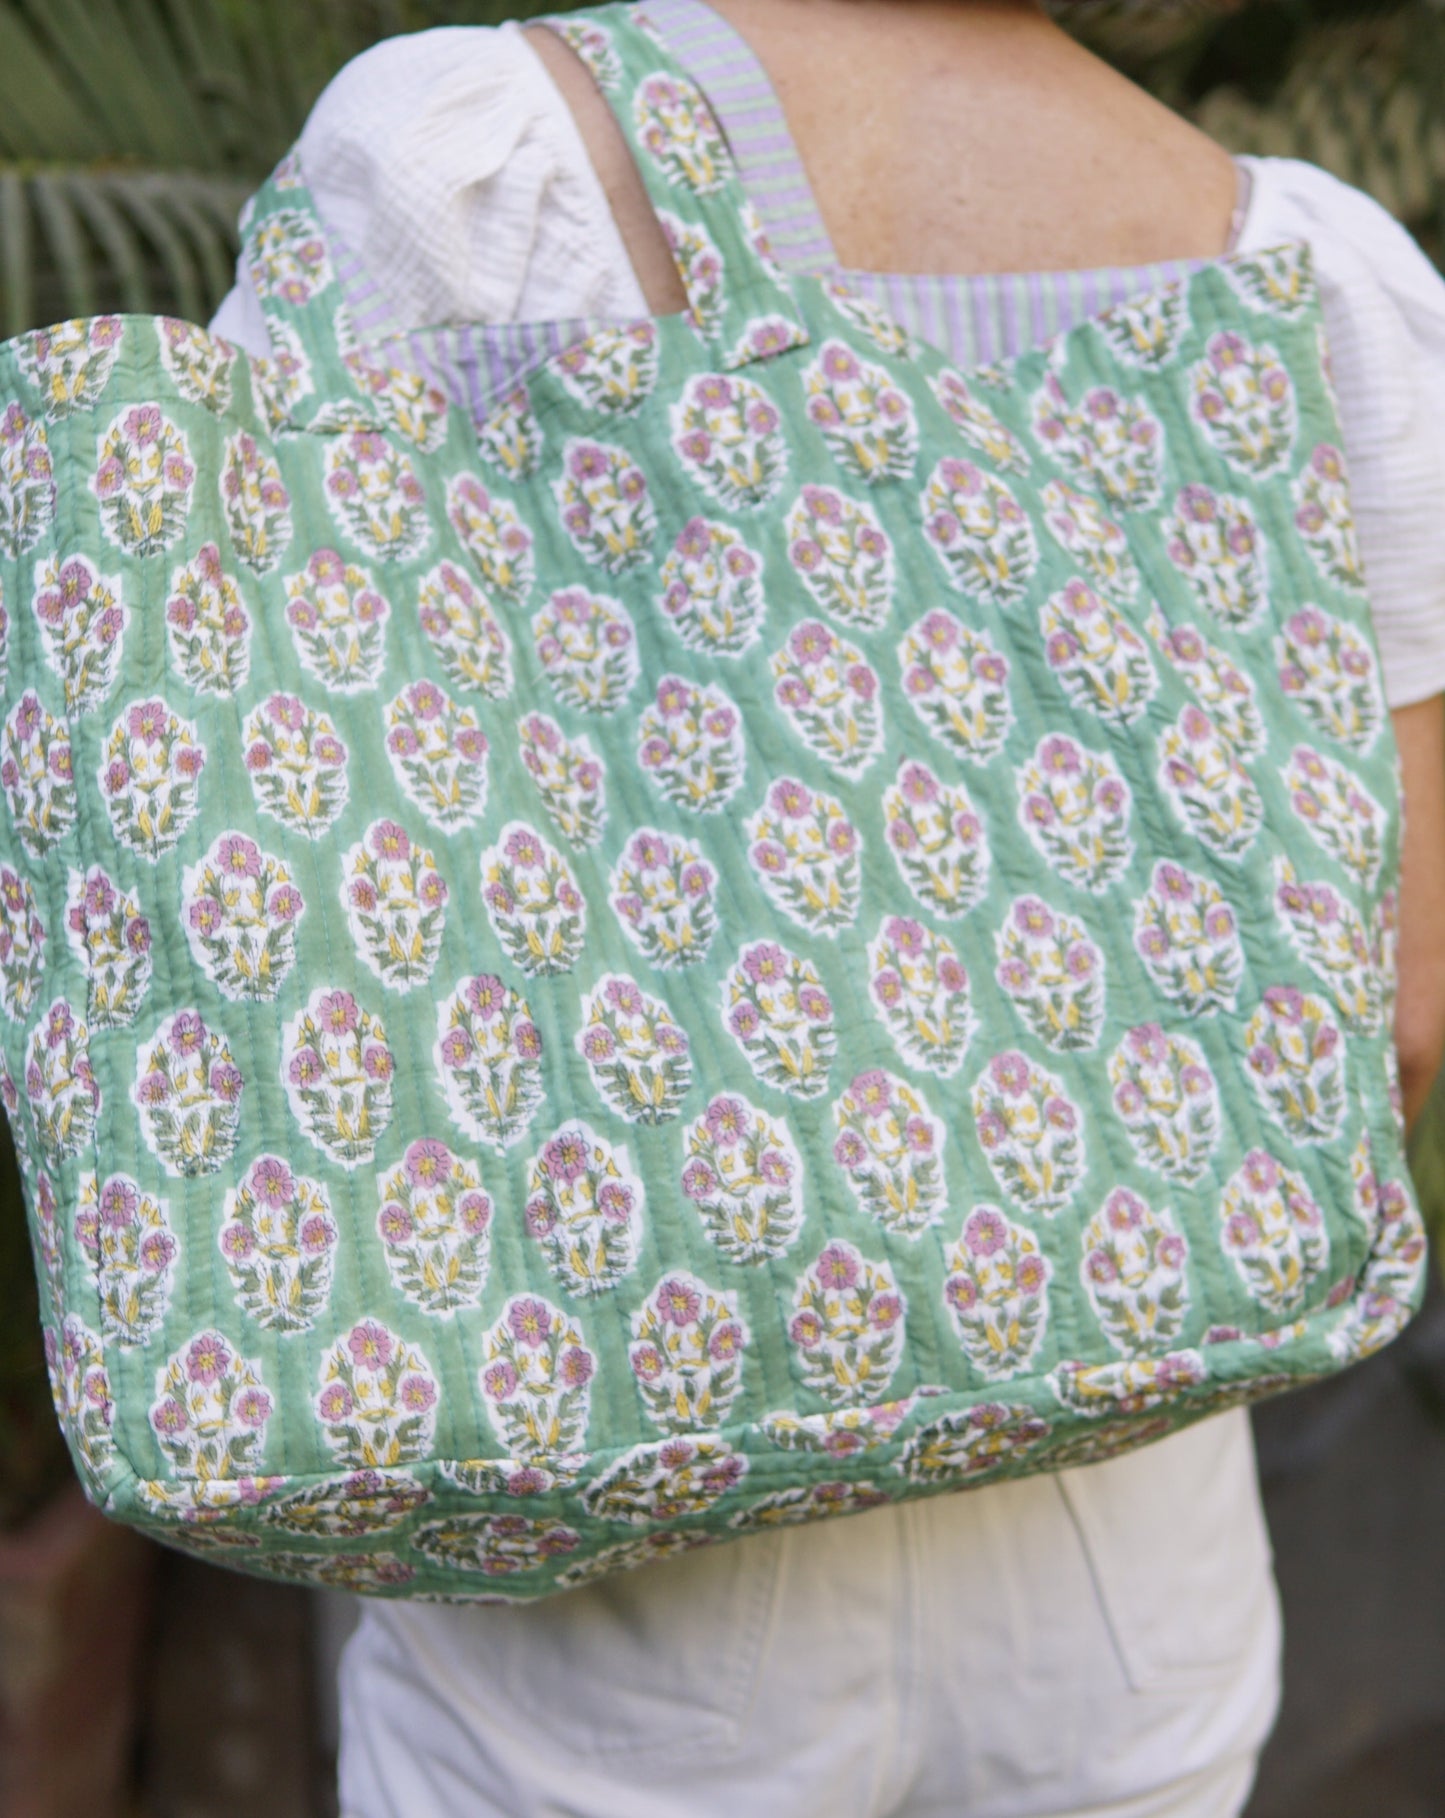 Beach bag, Green and lilac Provencal print with coordinating lining, X Large cotton, block printed tote bag. Handmade.